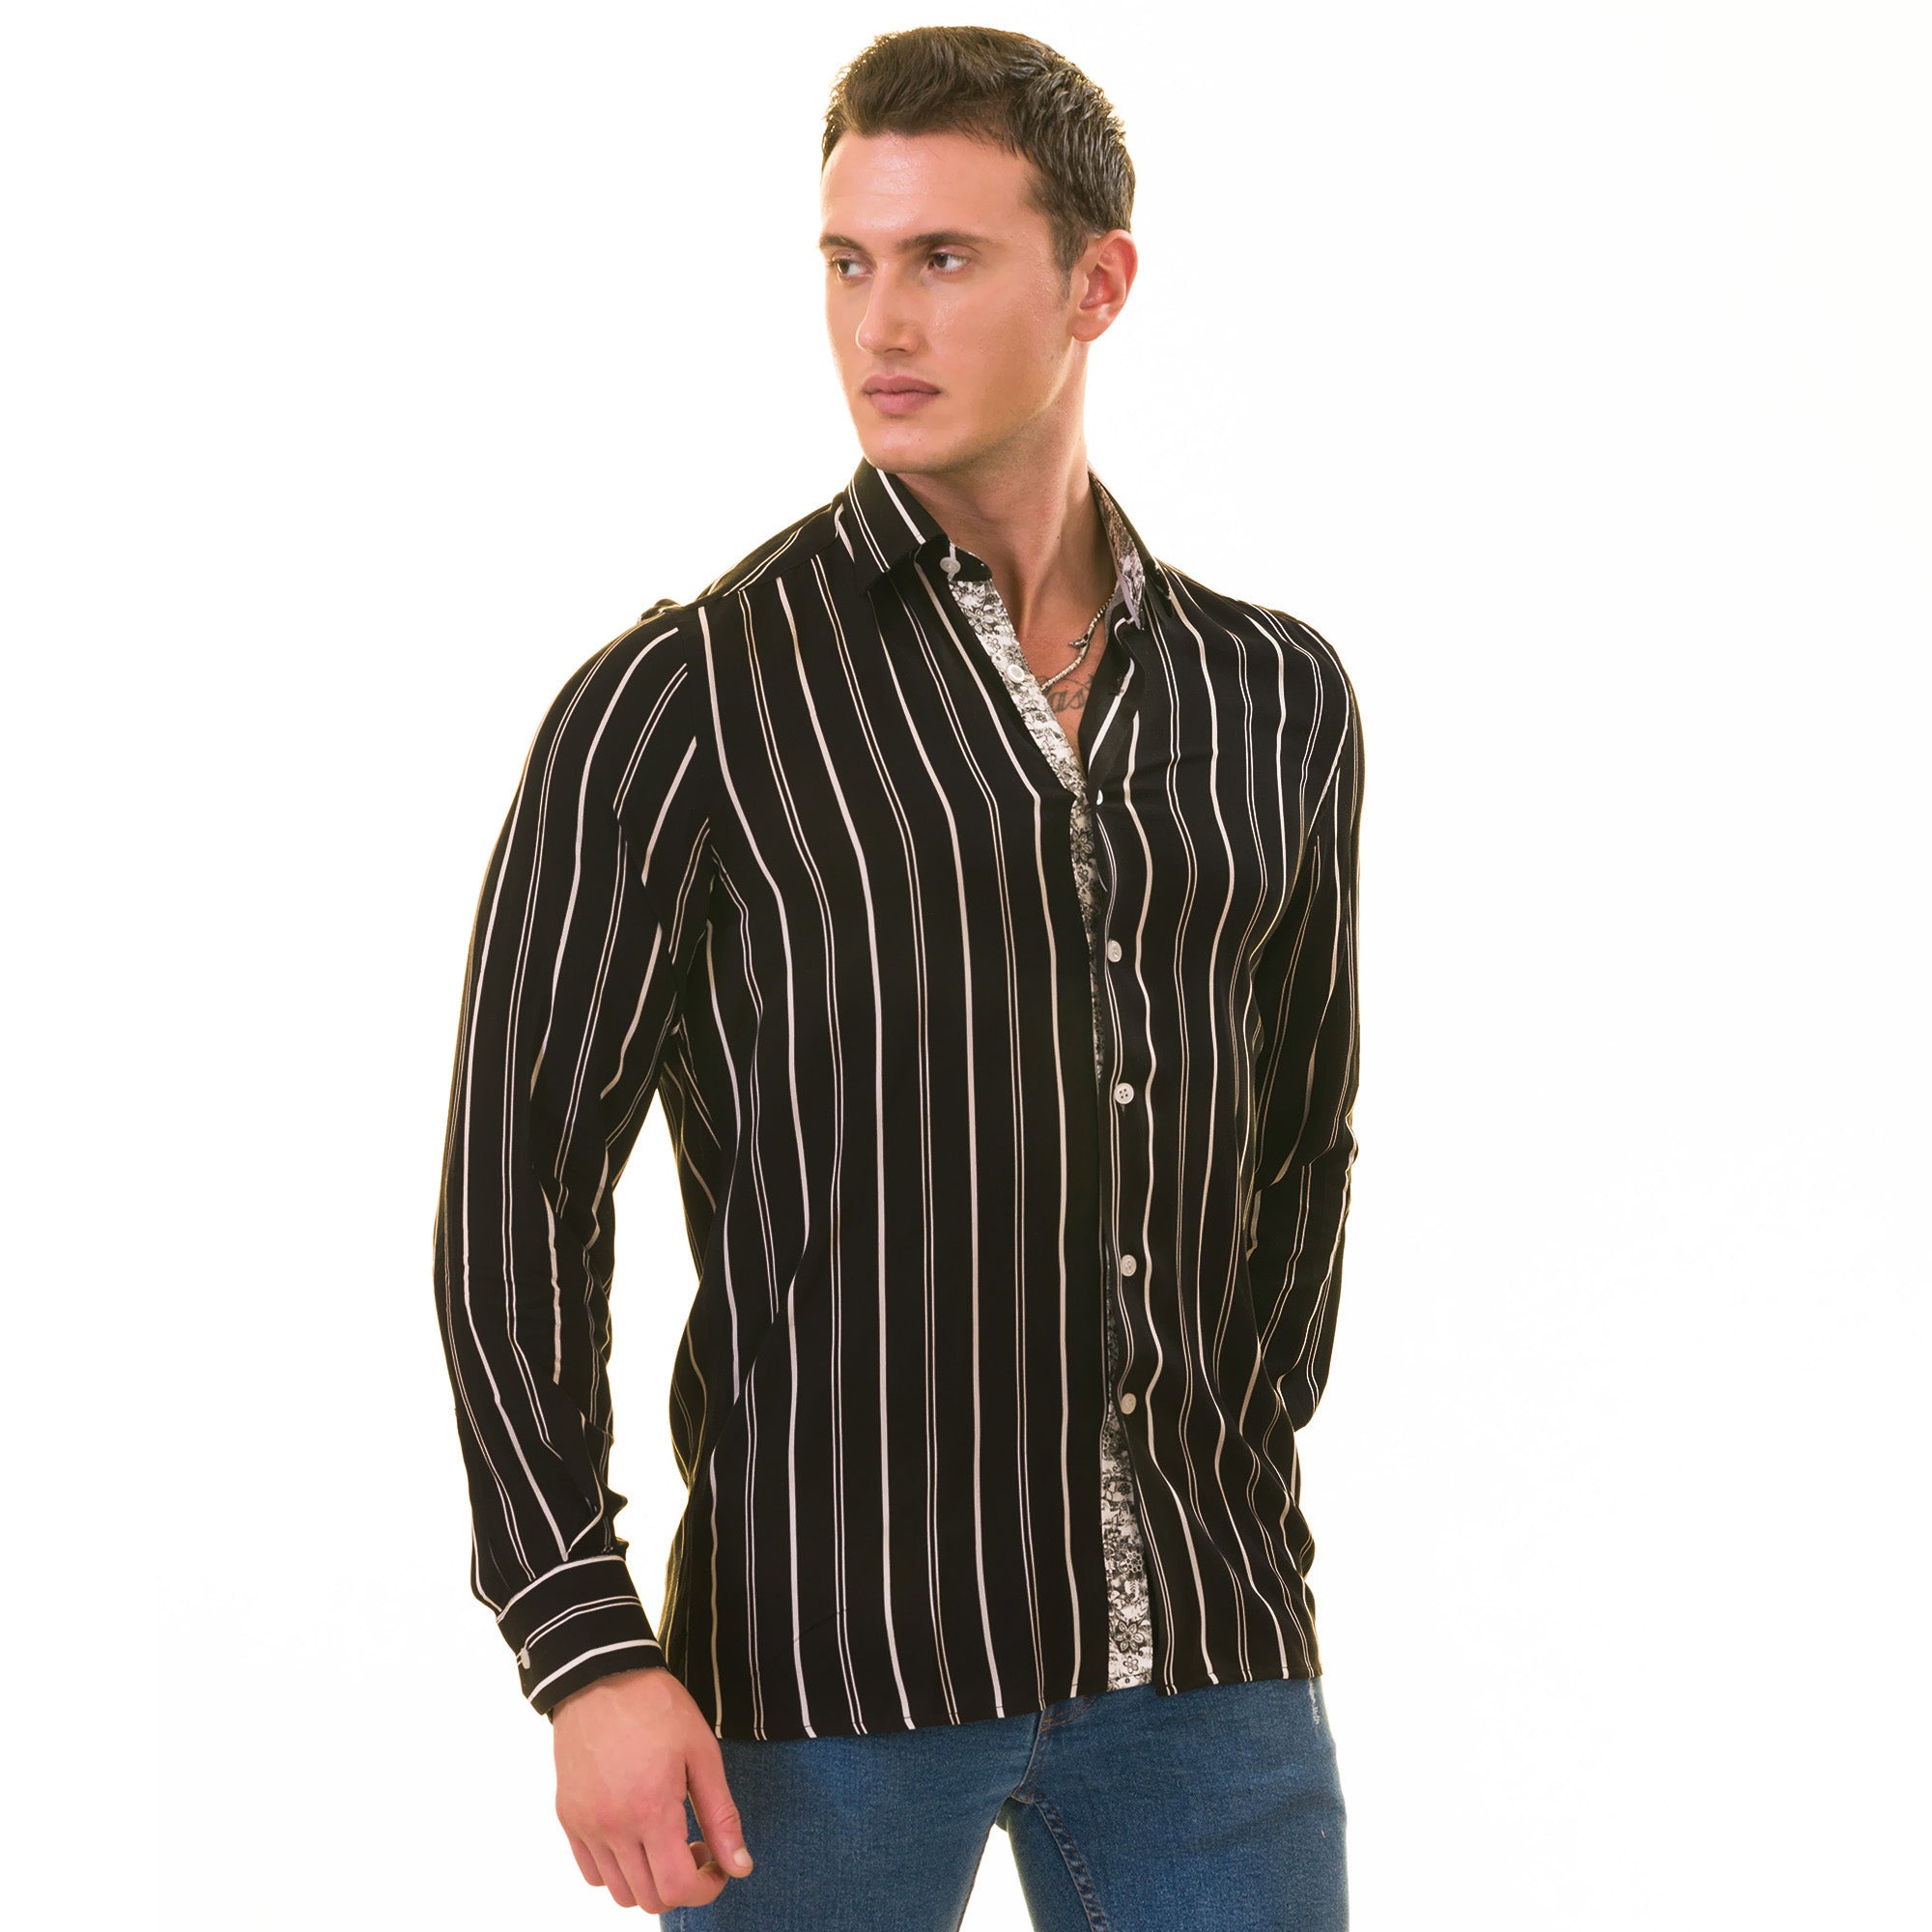 Black Striped Men's  Slim Fit Designer French Cuff Shirt - Tailored Cotton Shirts for Work and Casual Wear